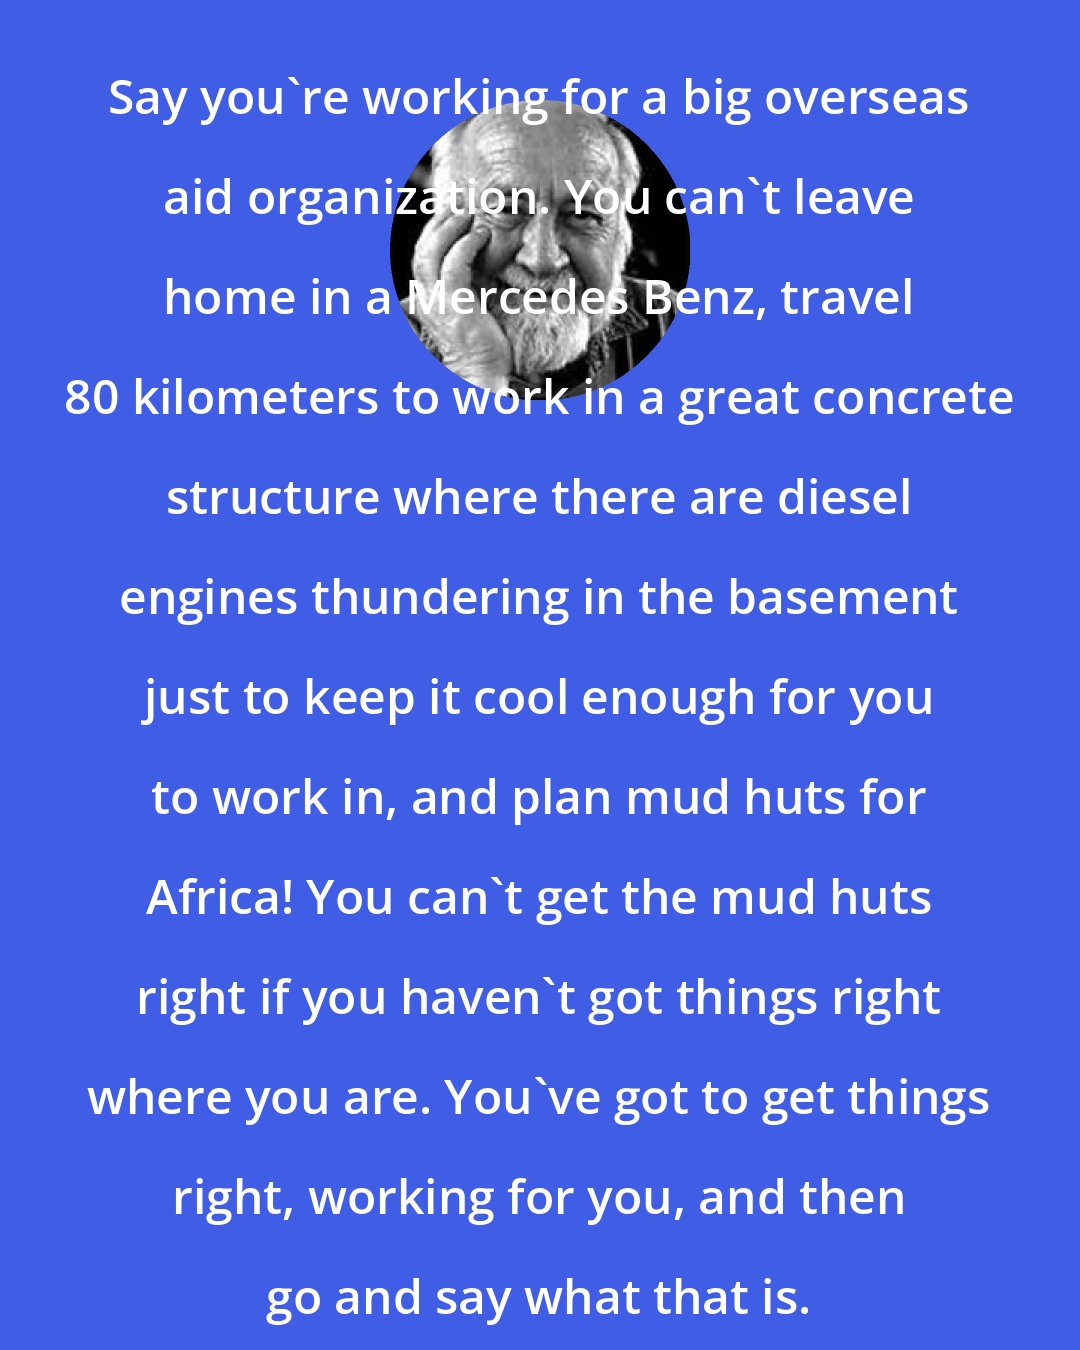 Bill Mollison: Say you're working for a big overseas aid organization. You can't leave home in a Mercedes Benz, travel 80 kilometers to work in a great concrete structure where there are diesel engines thundering in the basement just to keep it cool enough for you to work in, and plan mud huts for Africa! You can't get the mud huts right if you haven't got things right where you are. You've got to get things right, working for you, and then go and say what that is.